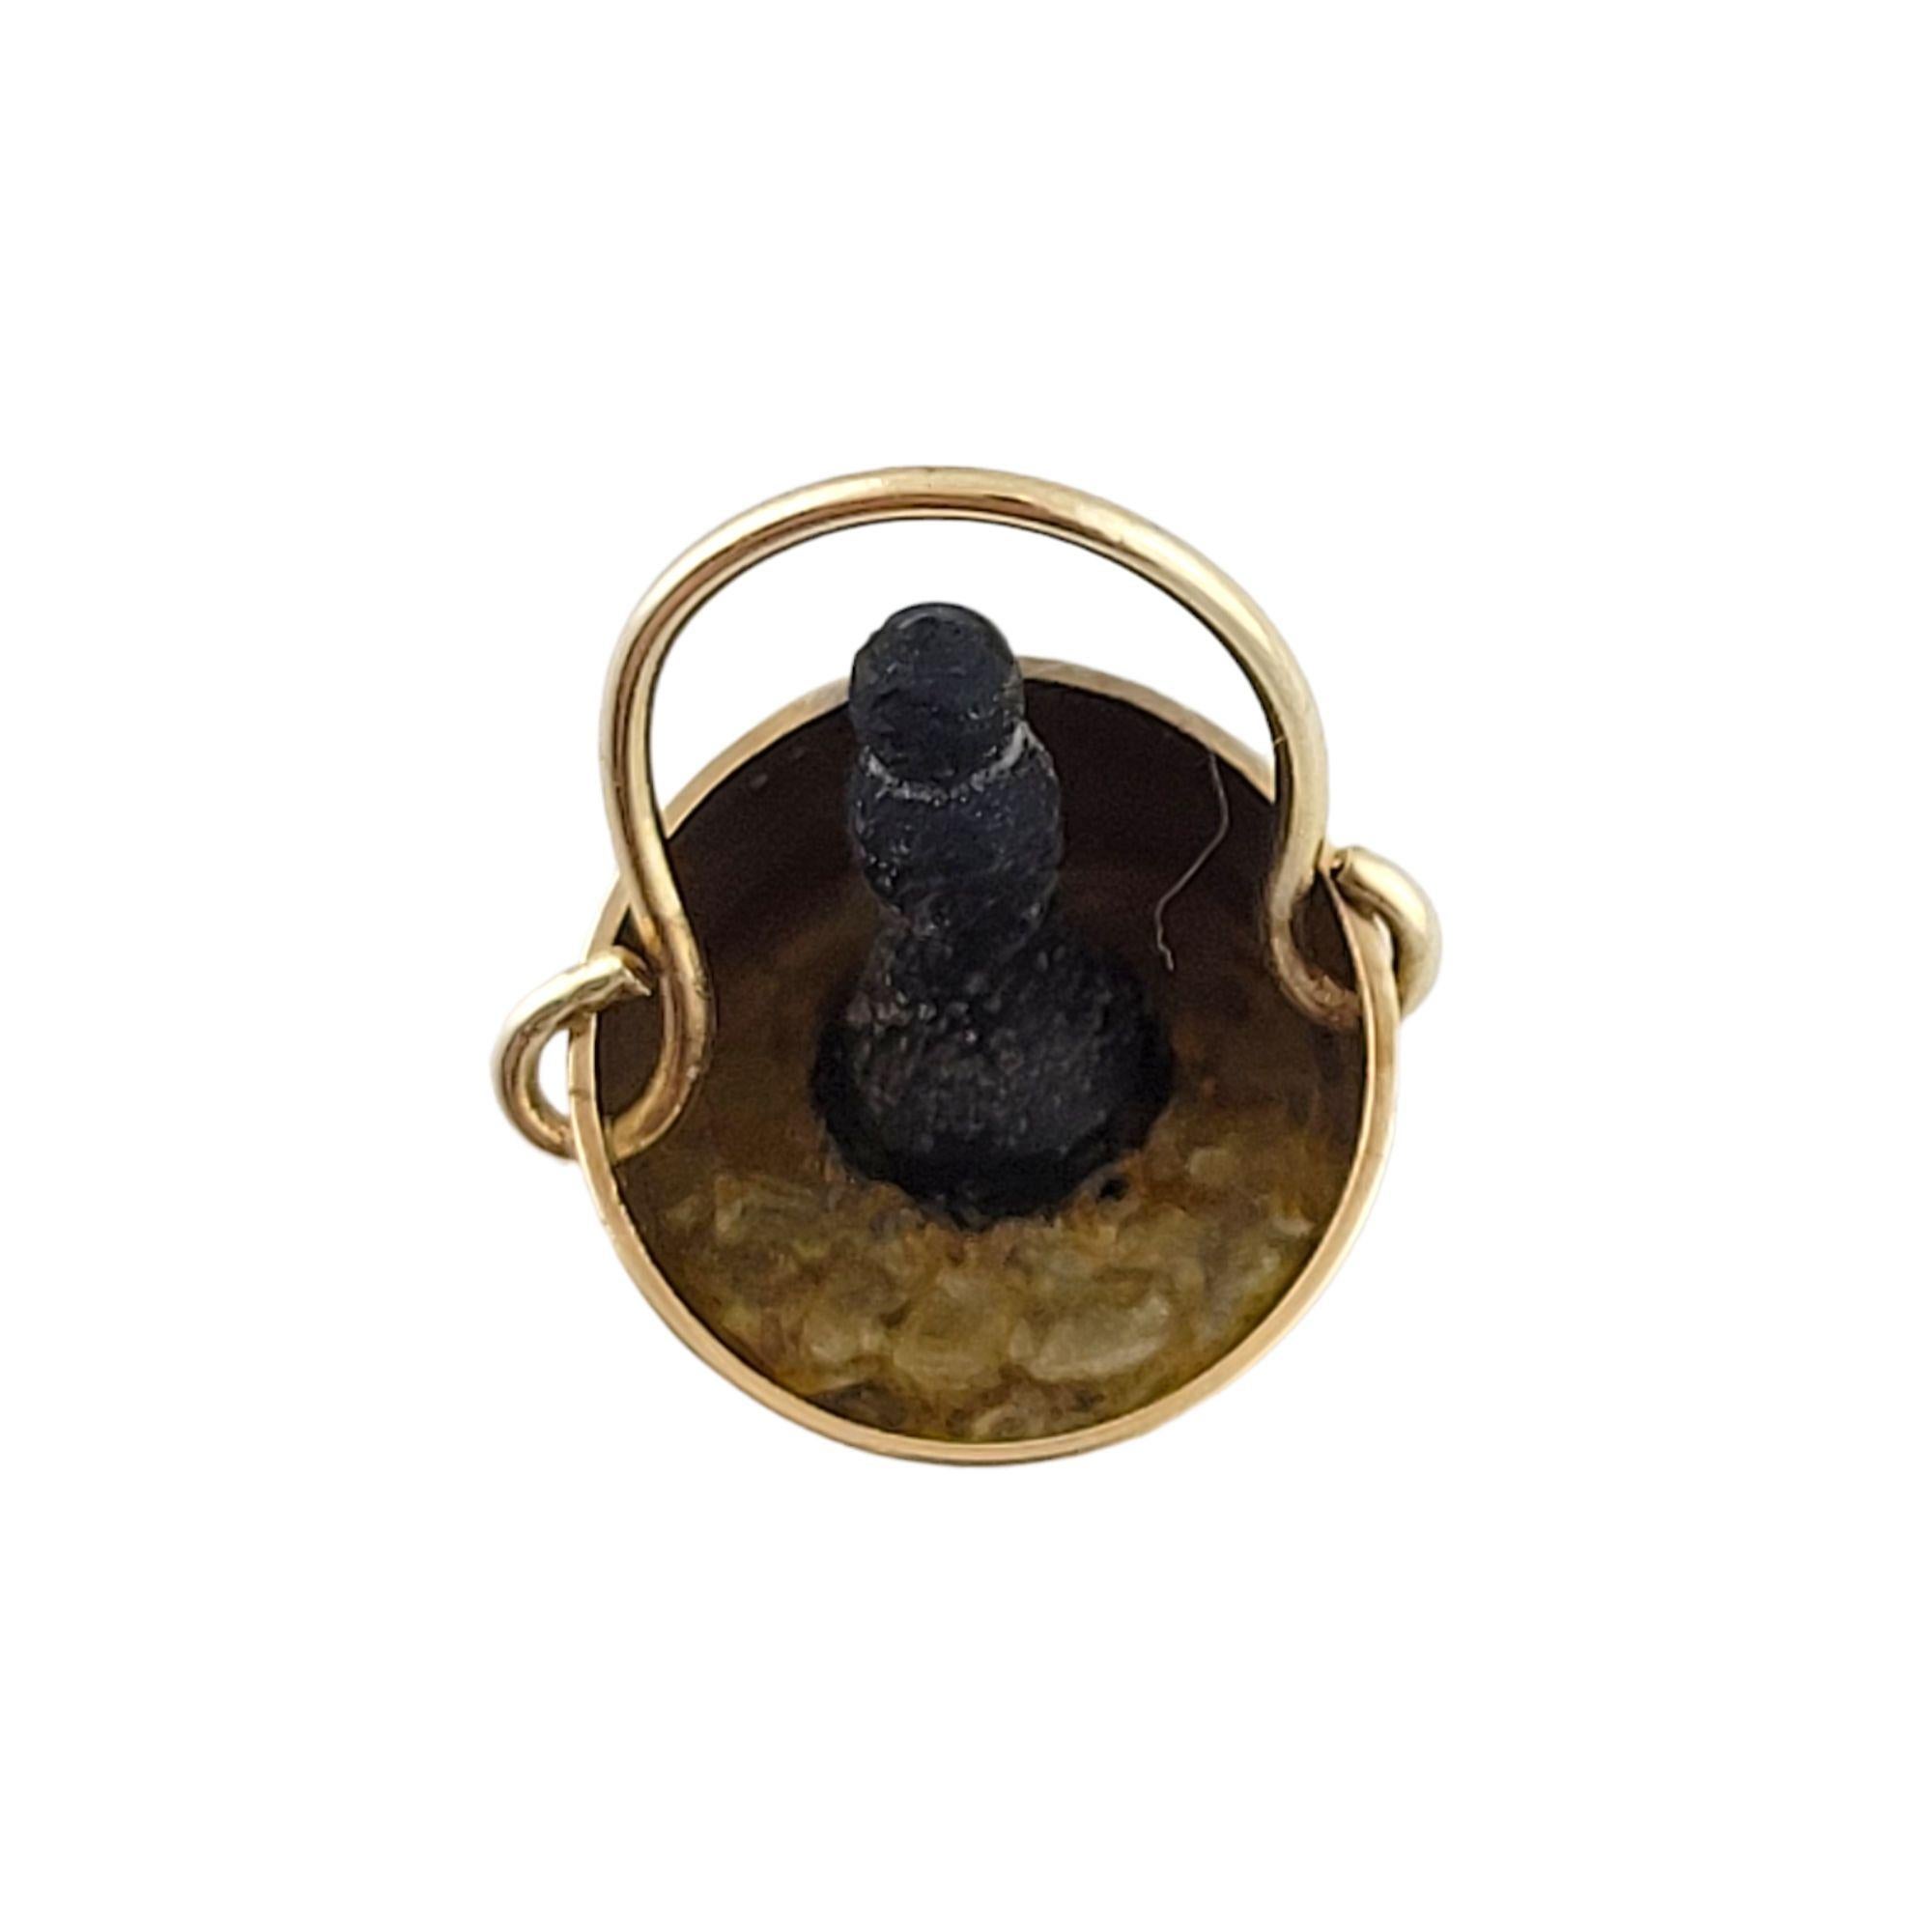 Vintage 9K Yellow Gold Bucket of Champagne

Adorable 9K yellow gold charm representing a bucket with a champagne bottle!

Size: 19mm X 13mm X 11.5mm

Weight: 1.9 g/ 1.2 dwt

Hallmark: GJLD 9.375

Very good condition, professionally polished.

Will